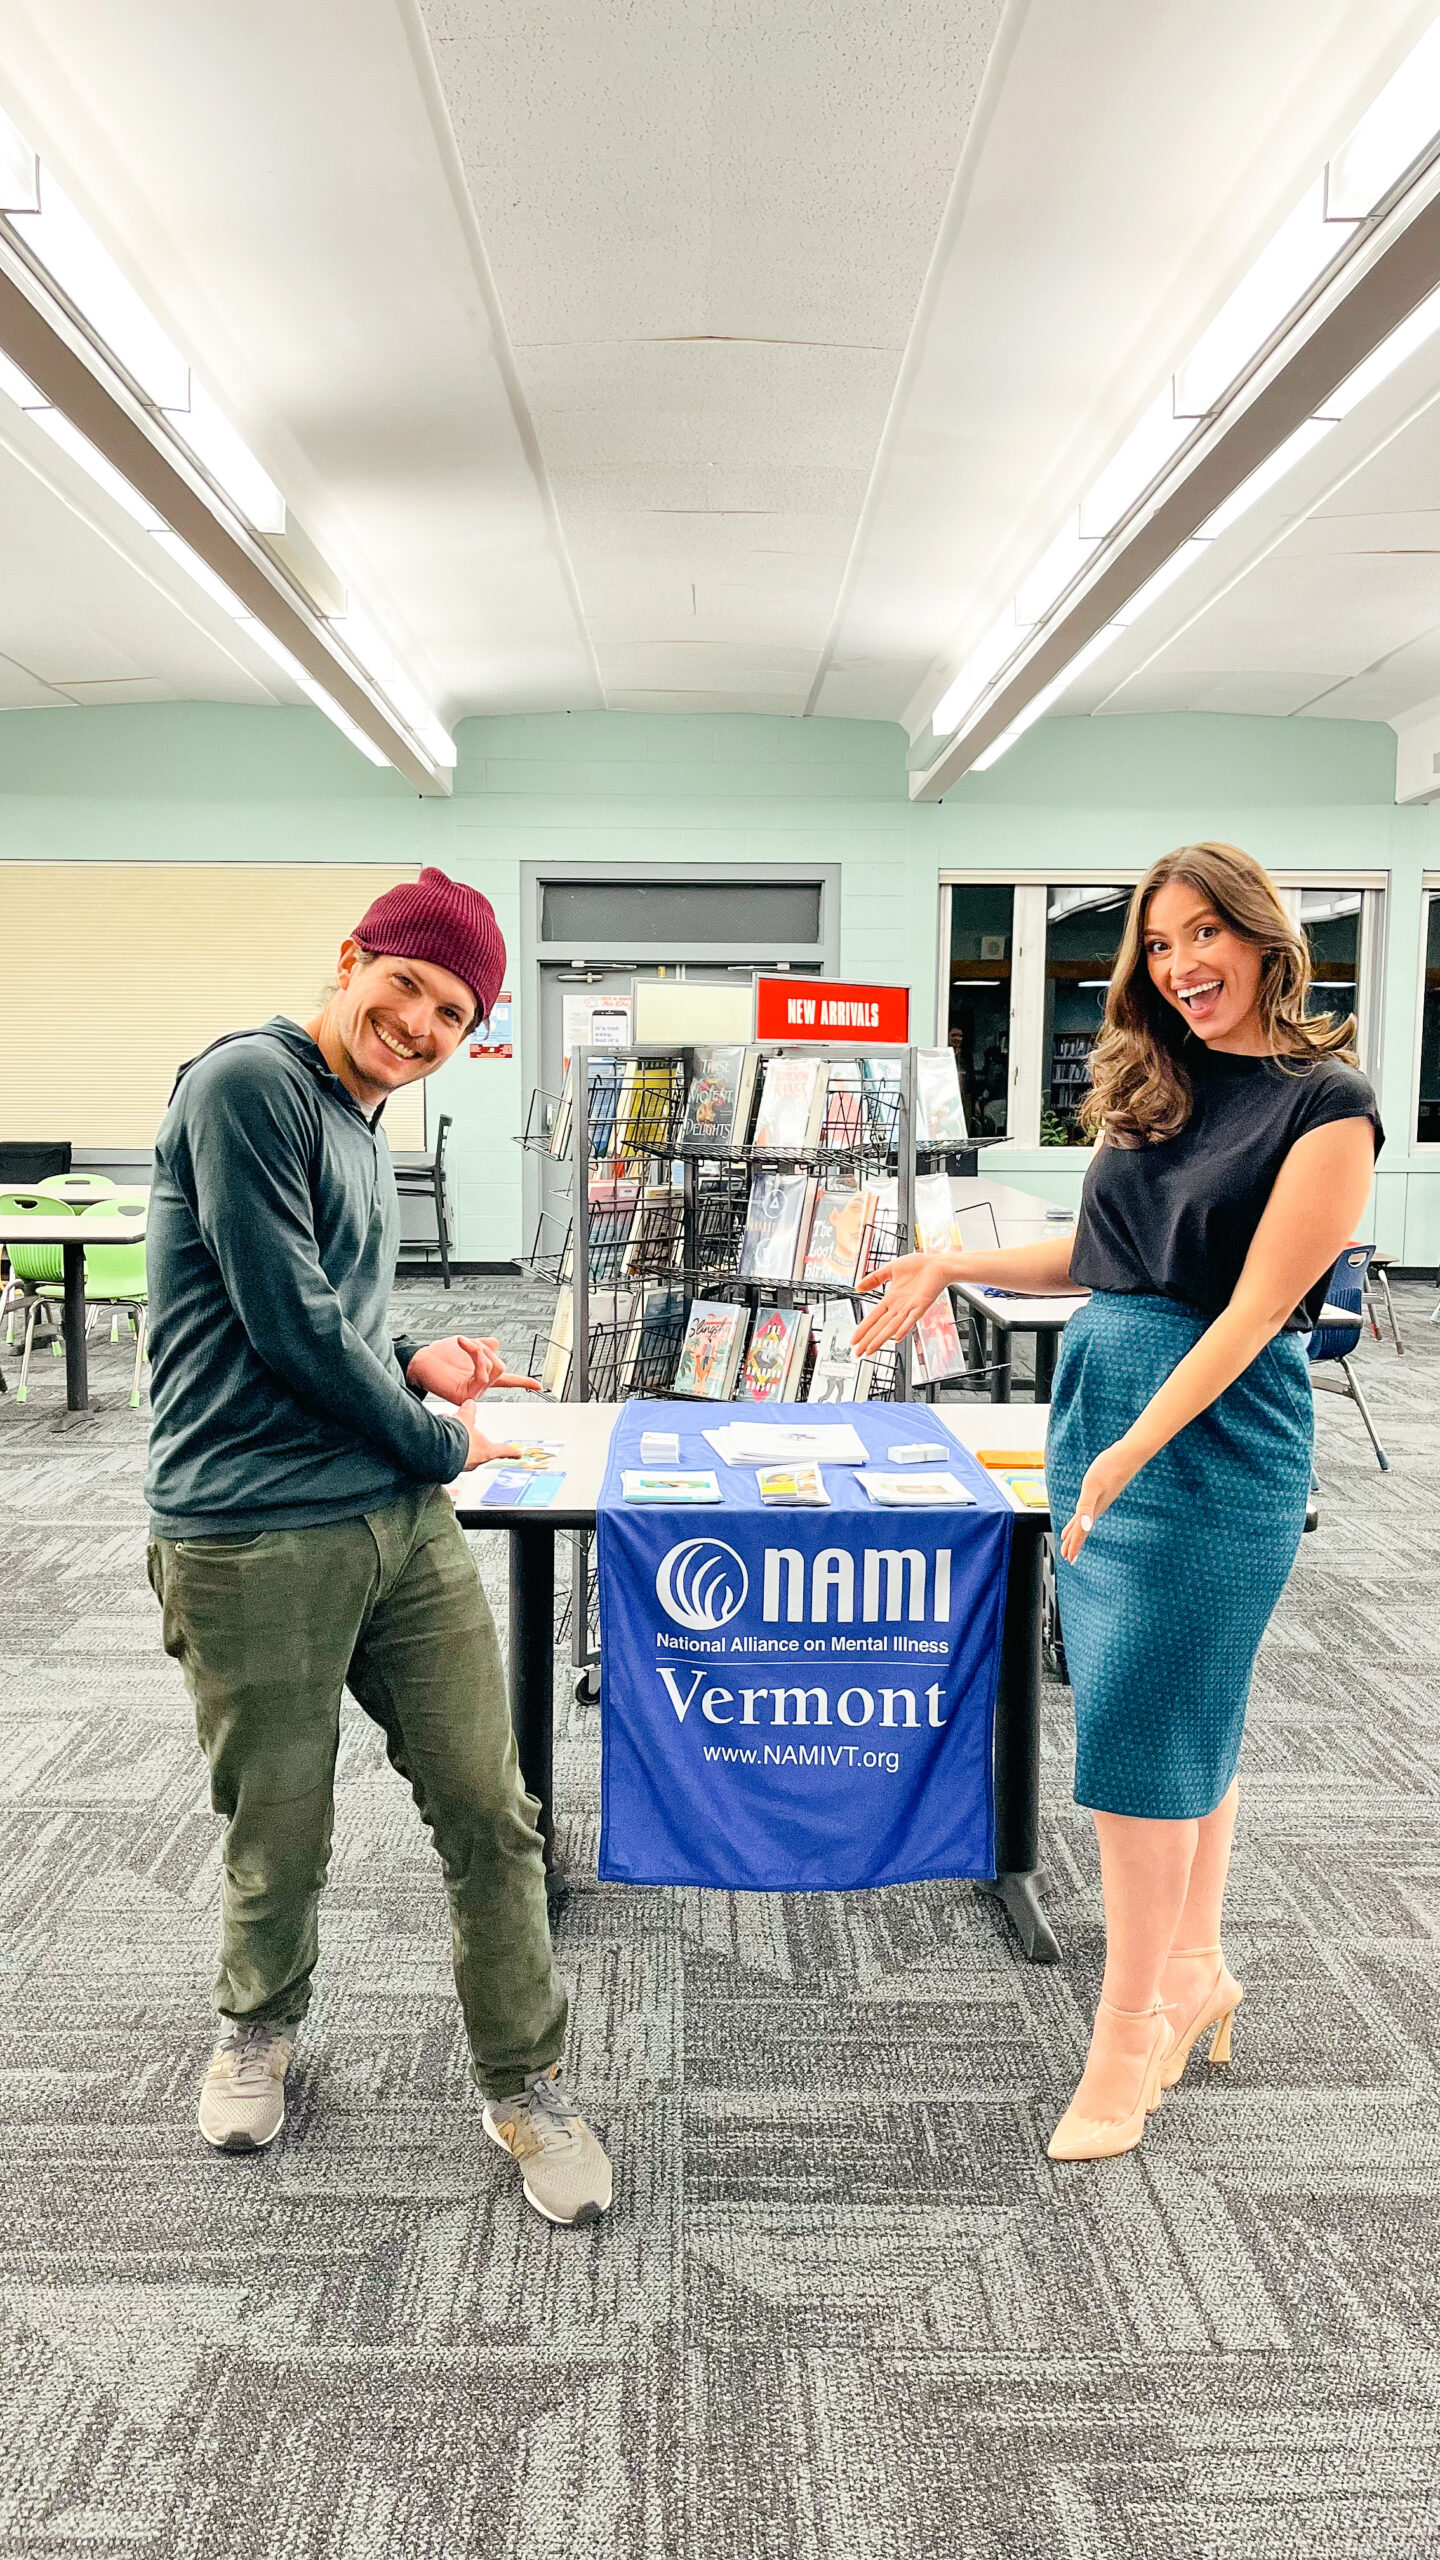 smiling young man and woman point at table with NAMI Vermont sign